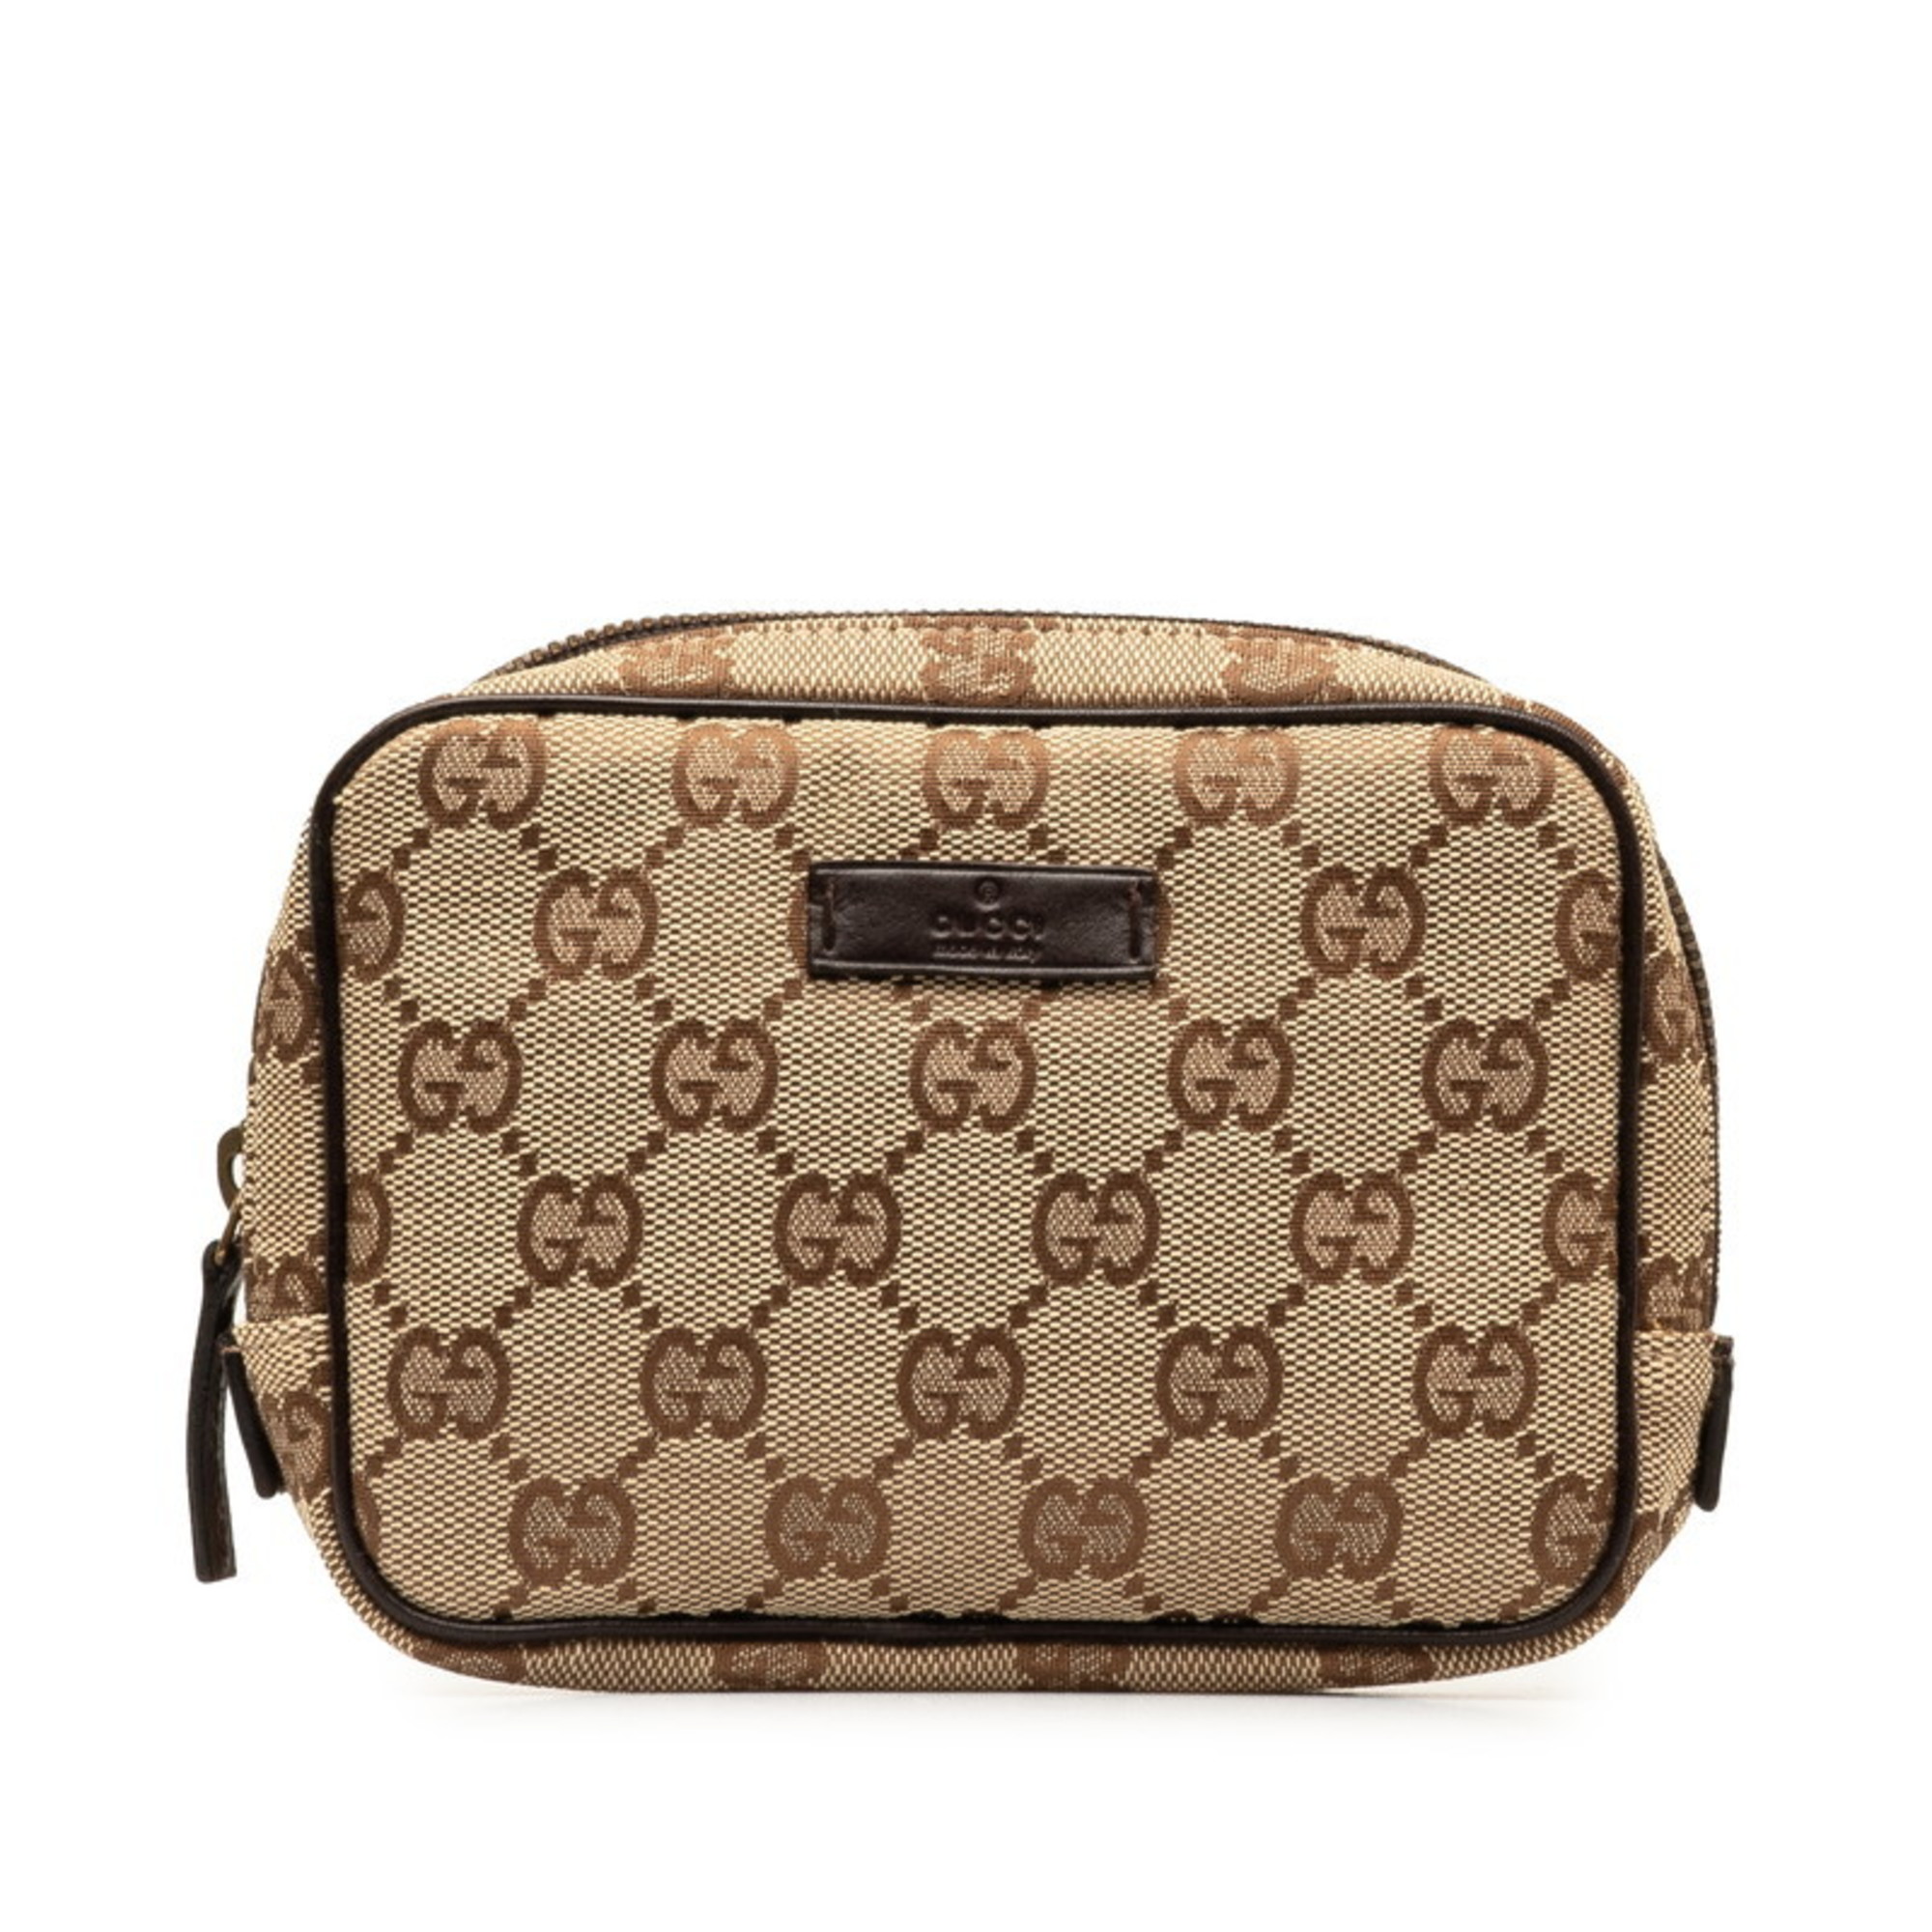 Gucci GG Canvas Pouch 106647 Beige Brown Leather Women's GUCCI